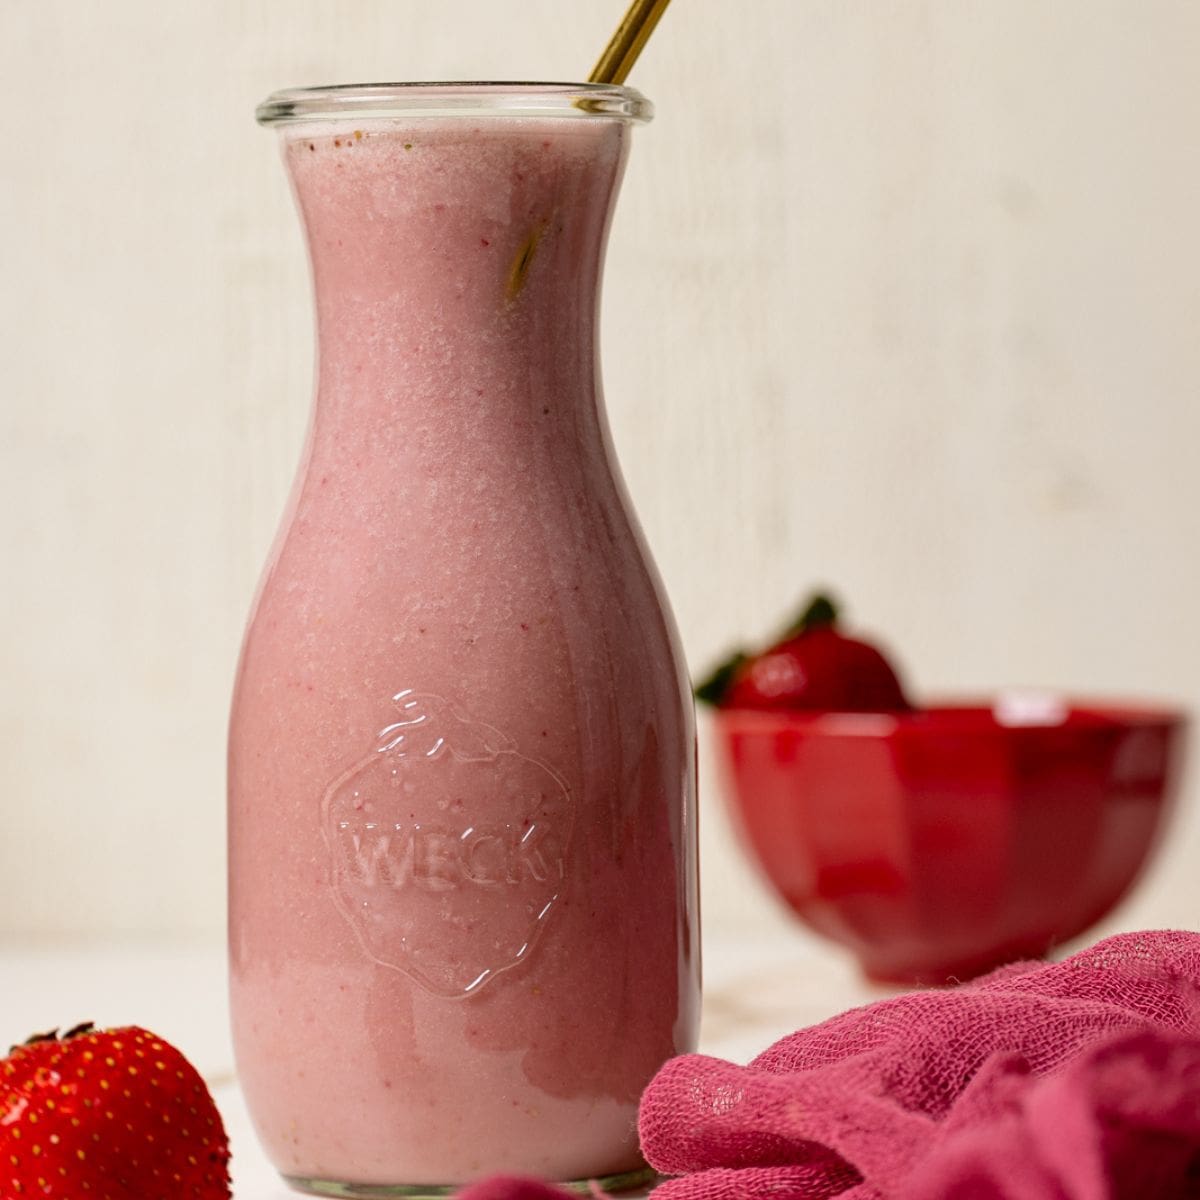 Strawberry milk in a jar with a straw and fresh strawberries.